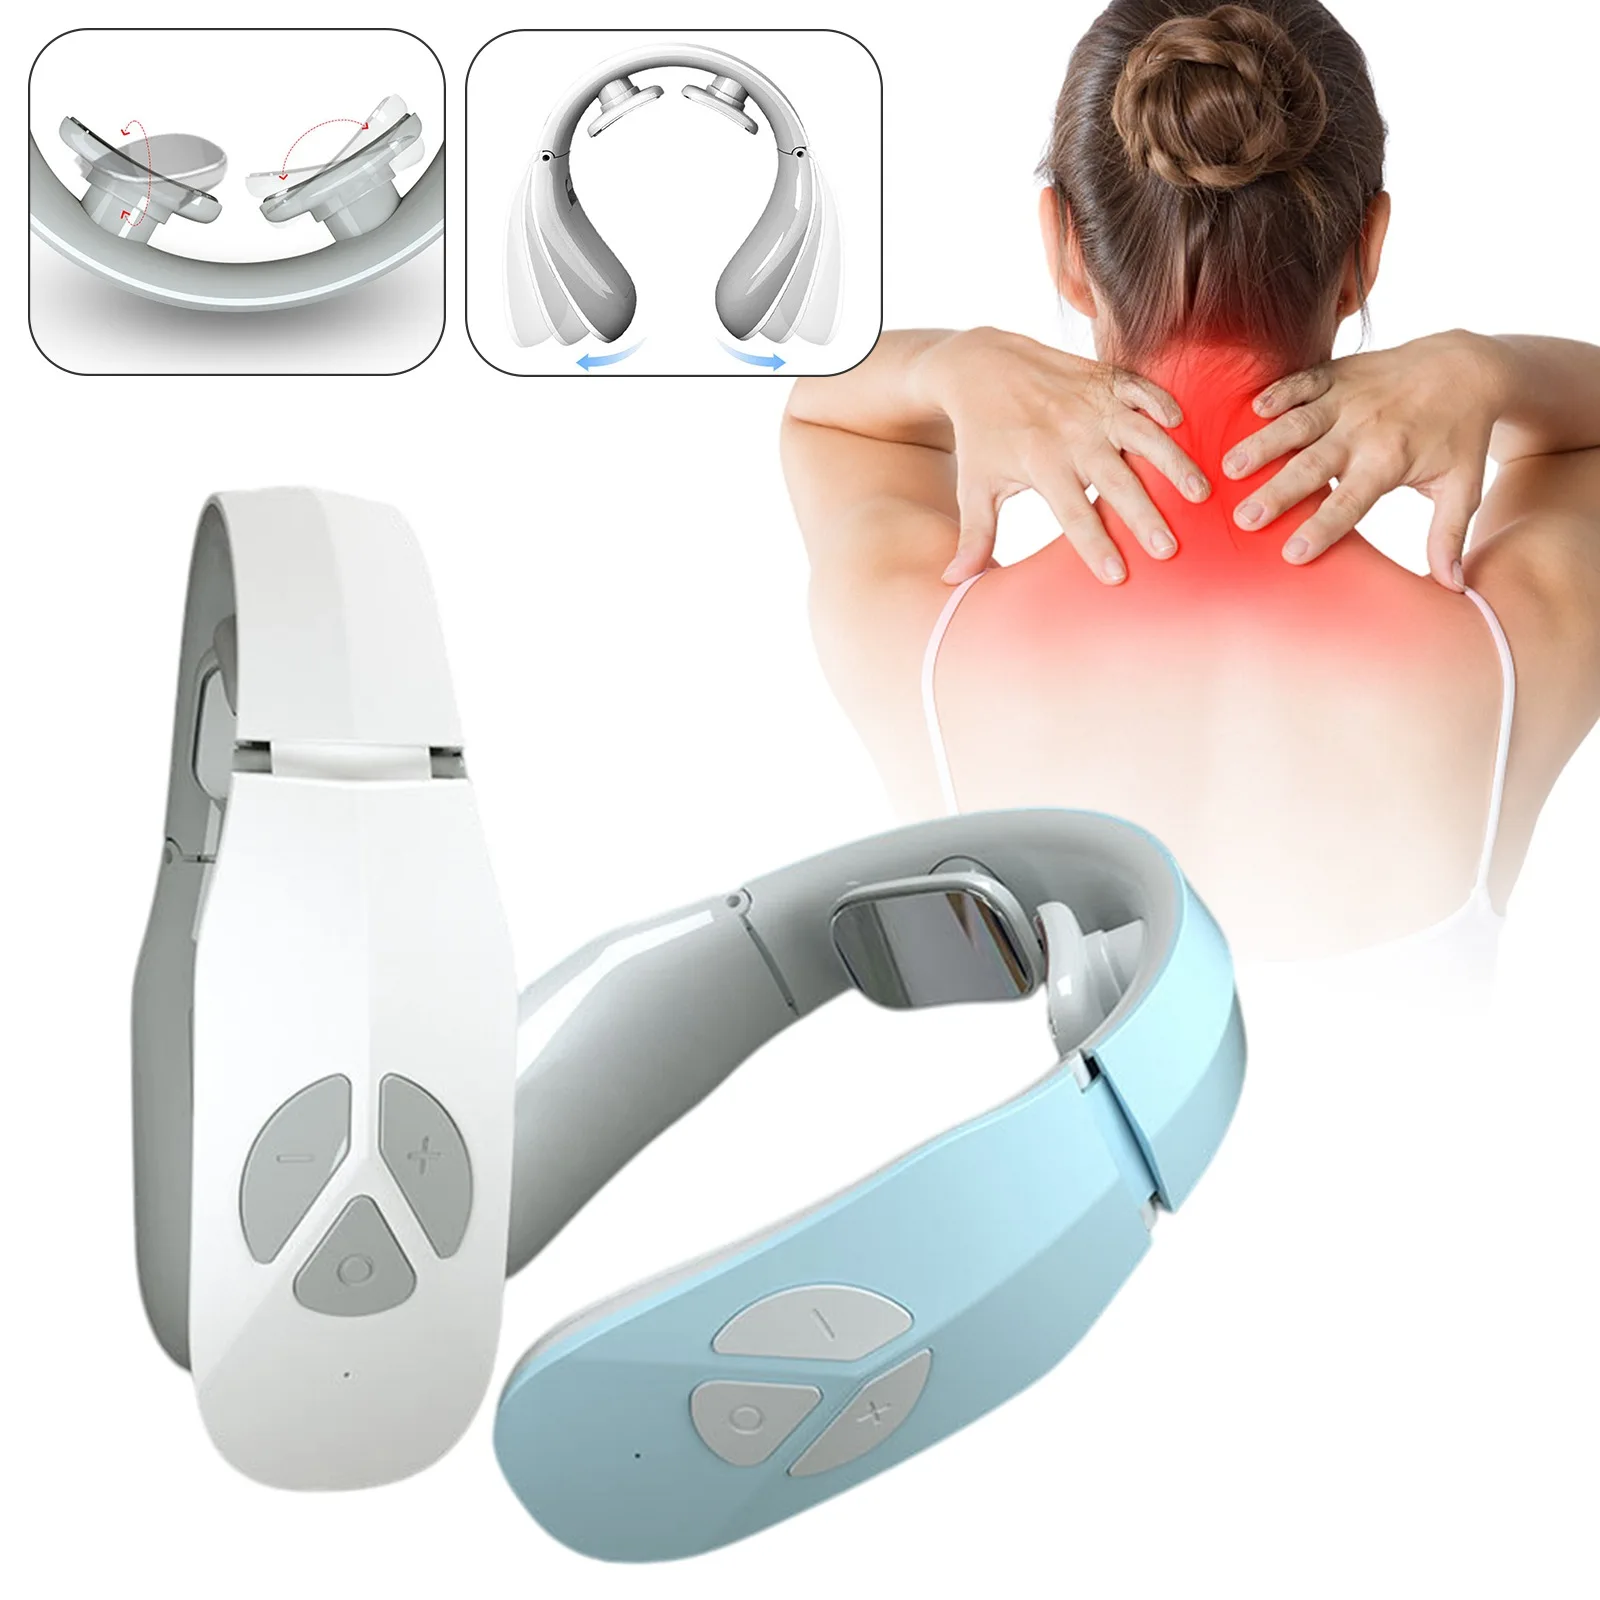 

Homeuse Electric Pulse Smart Neck Massager Pain Relief Therapy Health Care Relaxation Tool Intelligent Cervical Massager